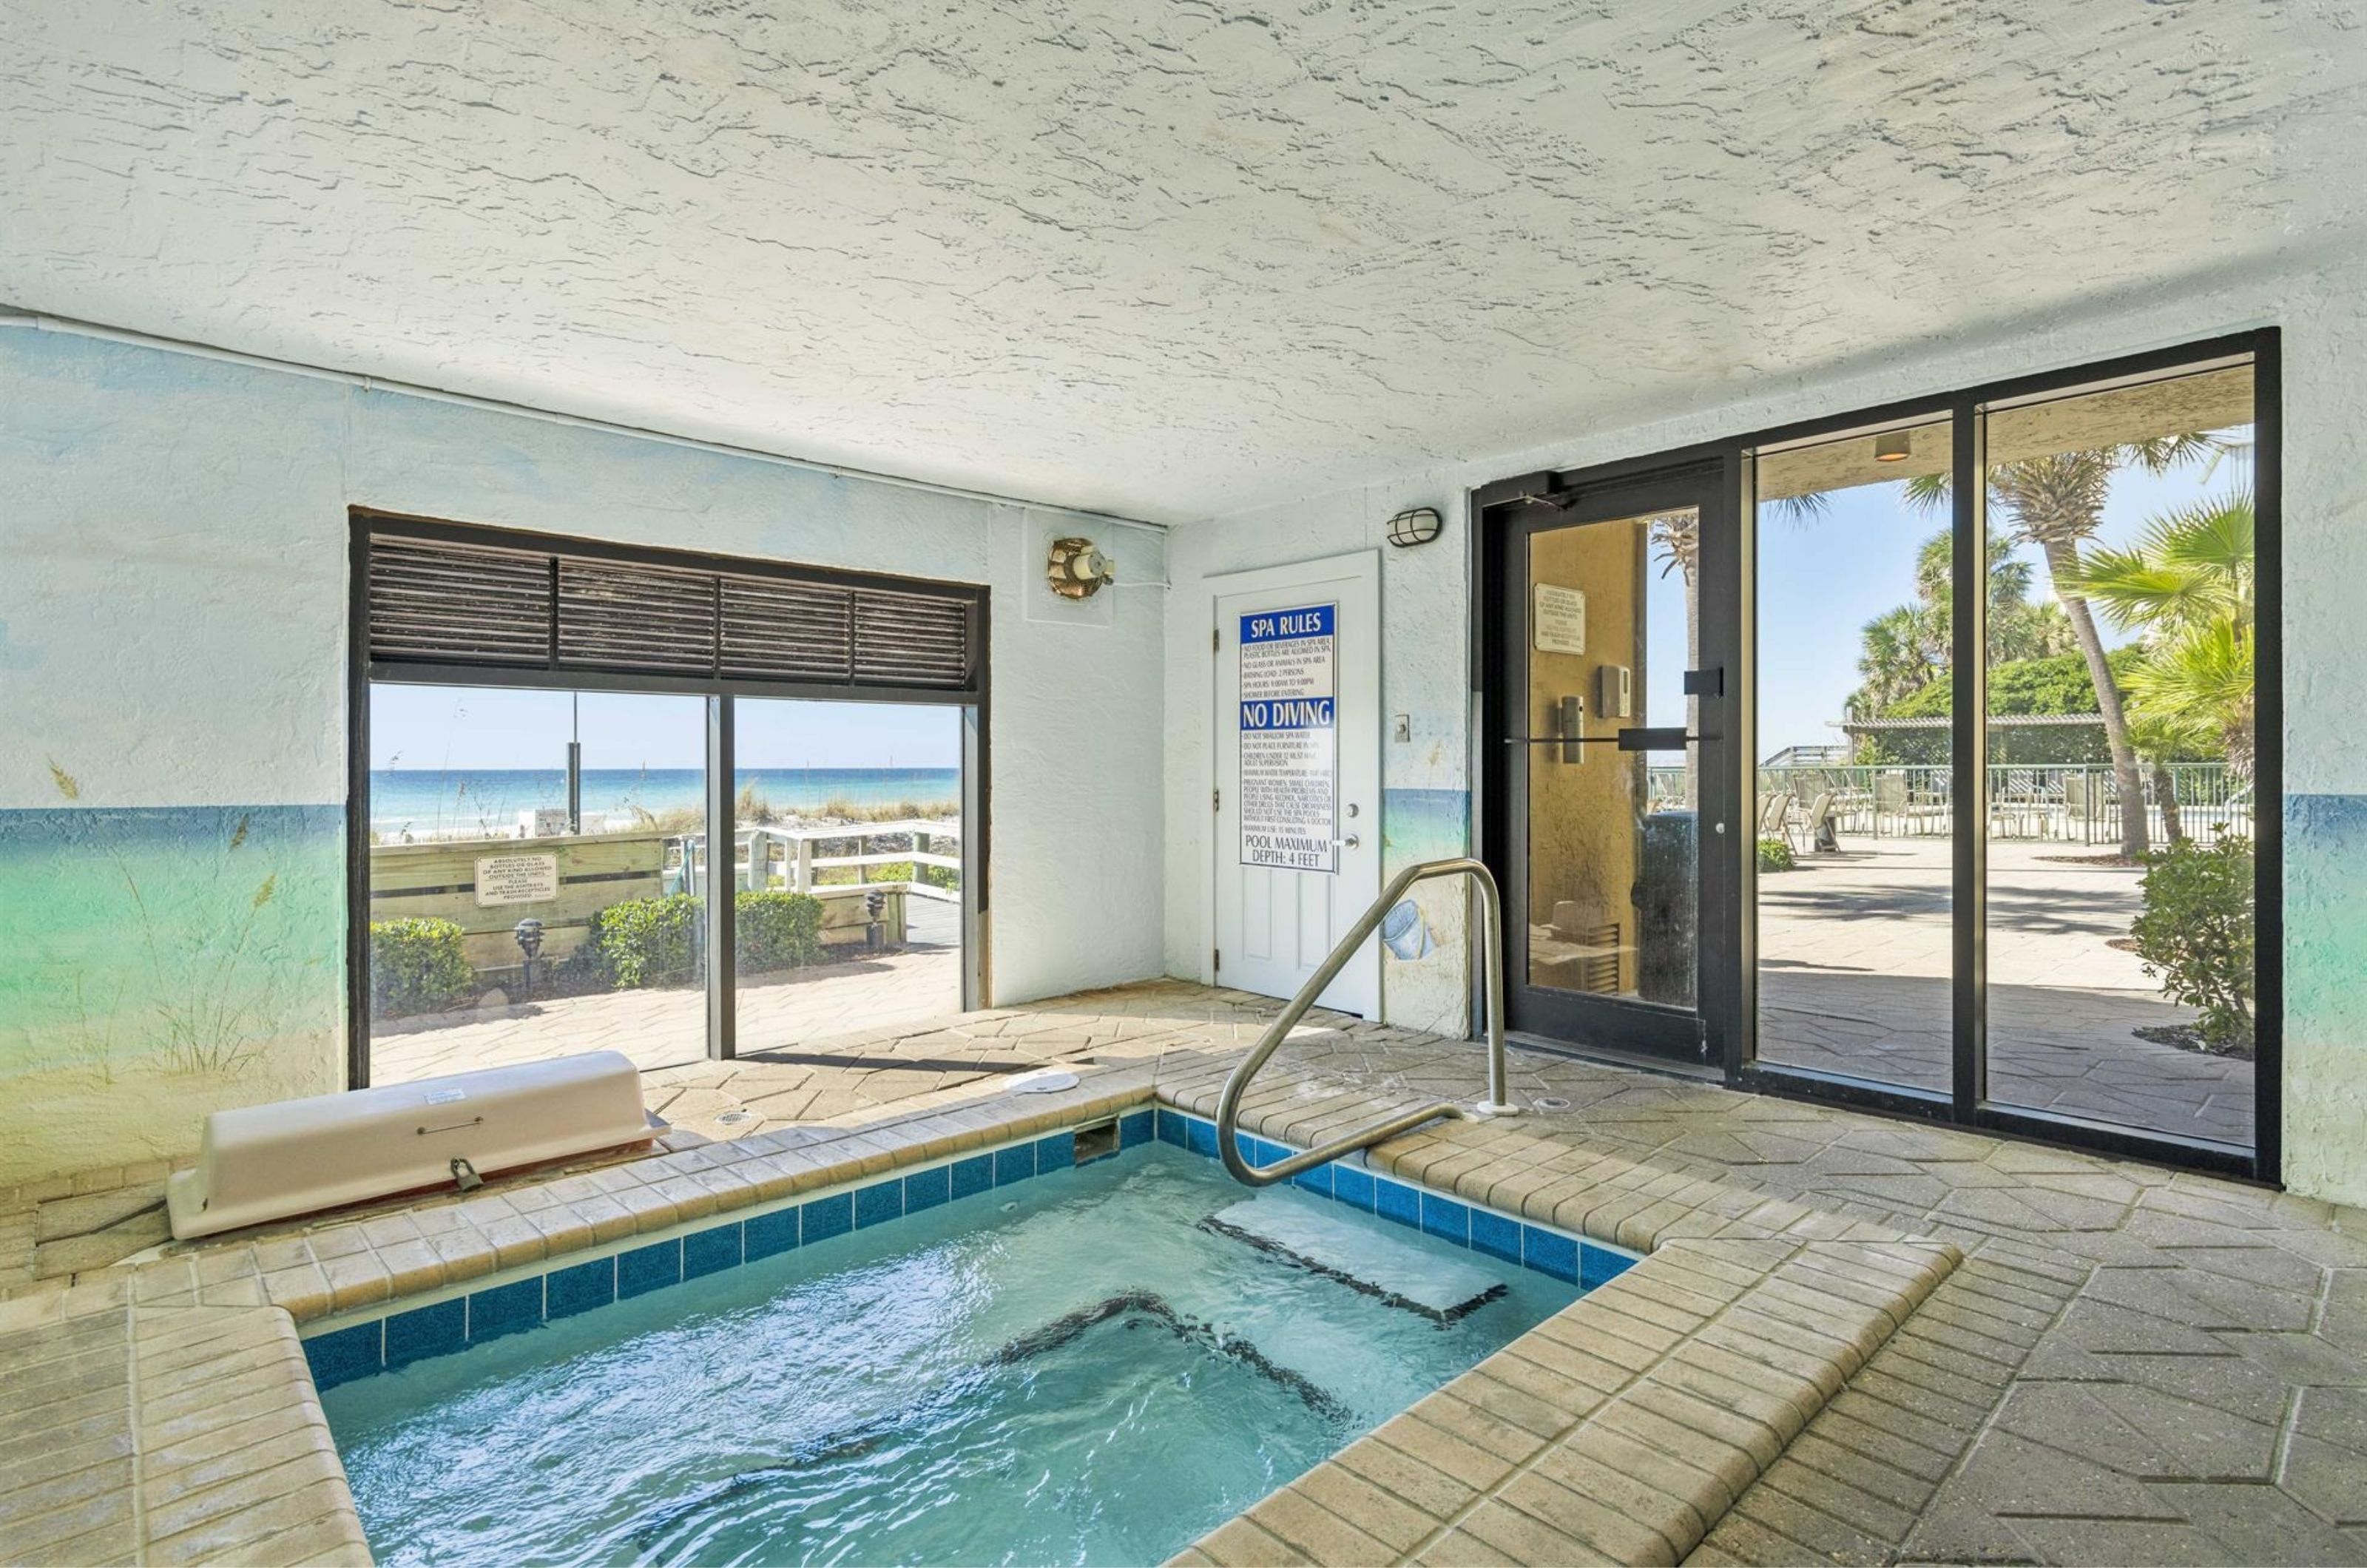 The indoor hot tub surrounded by windows at Destin Beach Club in Destin Florida	